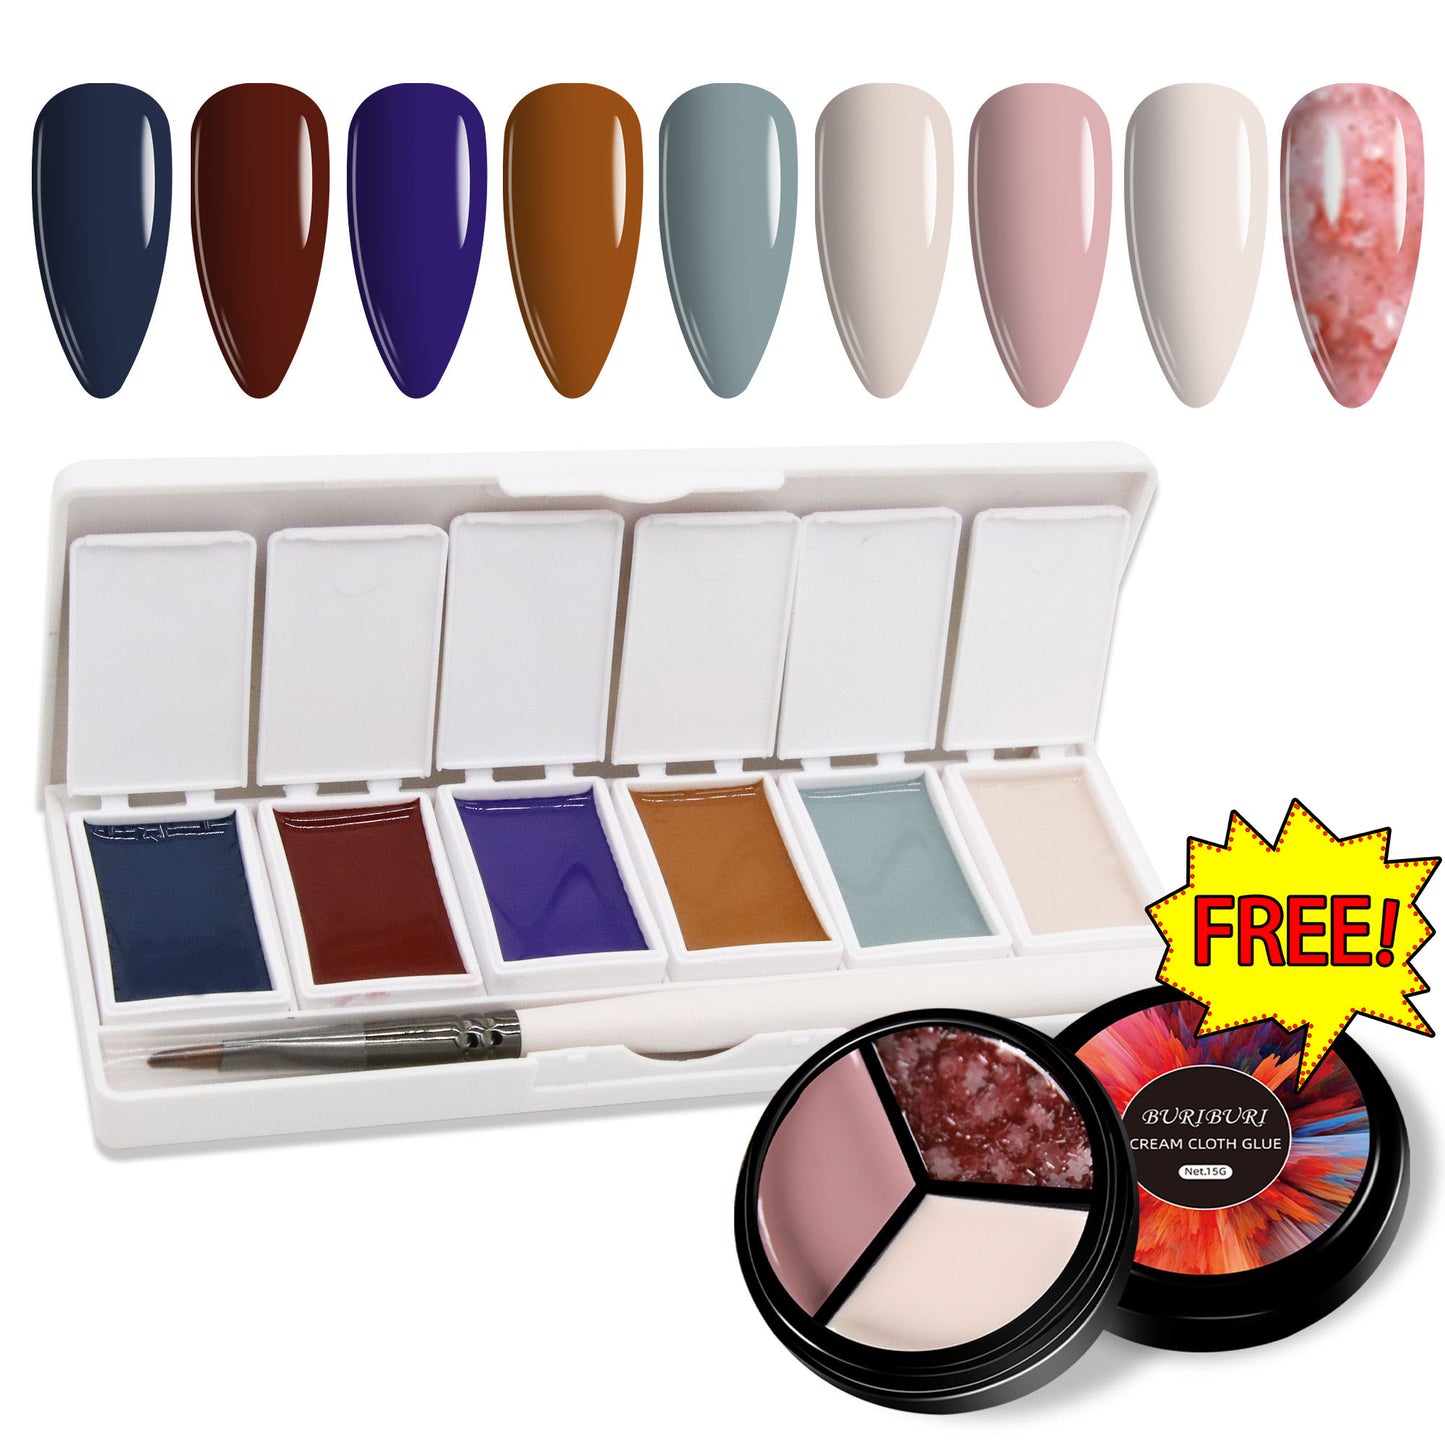 Dunhuang Mural 6-colors-in-1 + Free 3-colors-in-1 (#24) Solid Cream Gel Polish